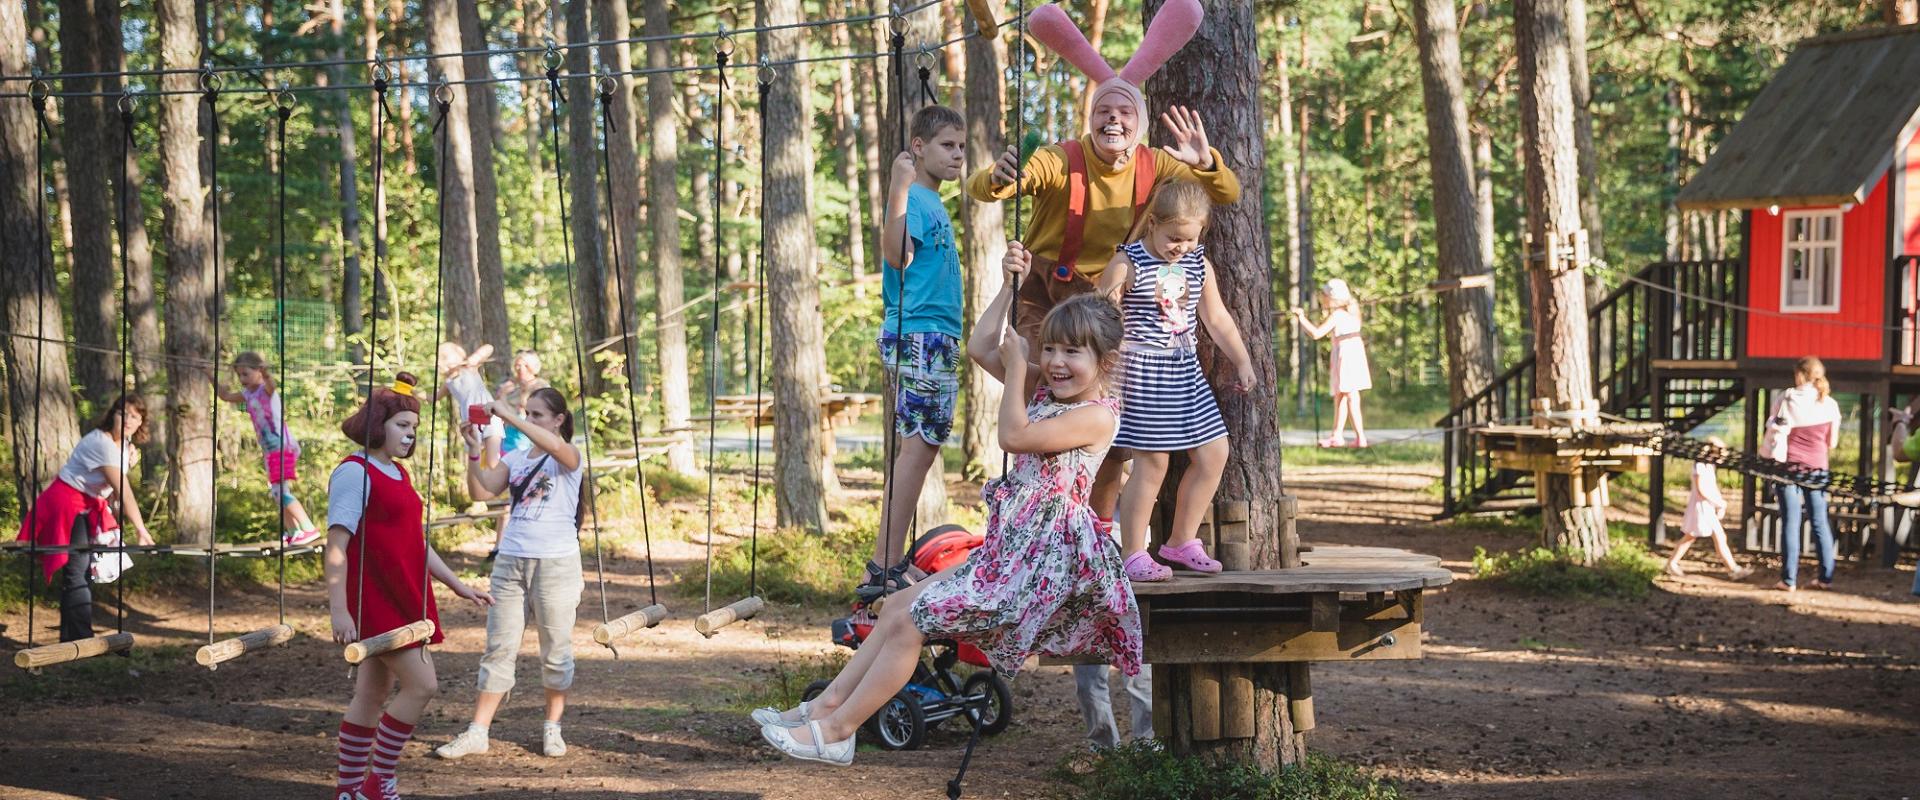 Lottemaa Theme Park - the largest family theme park in Estonia!